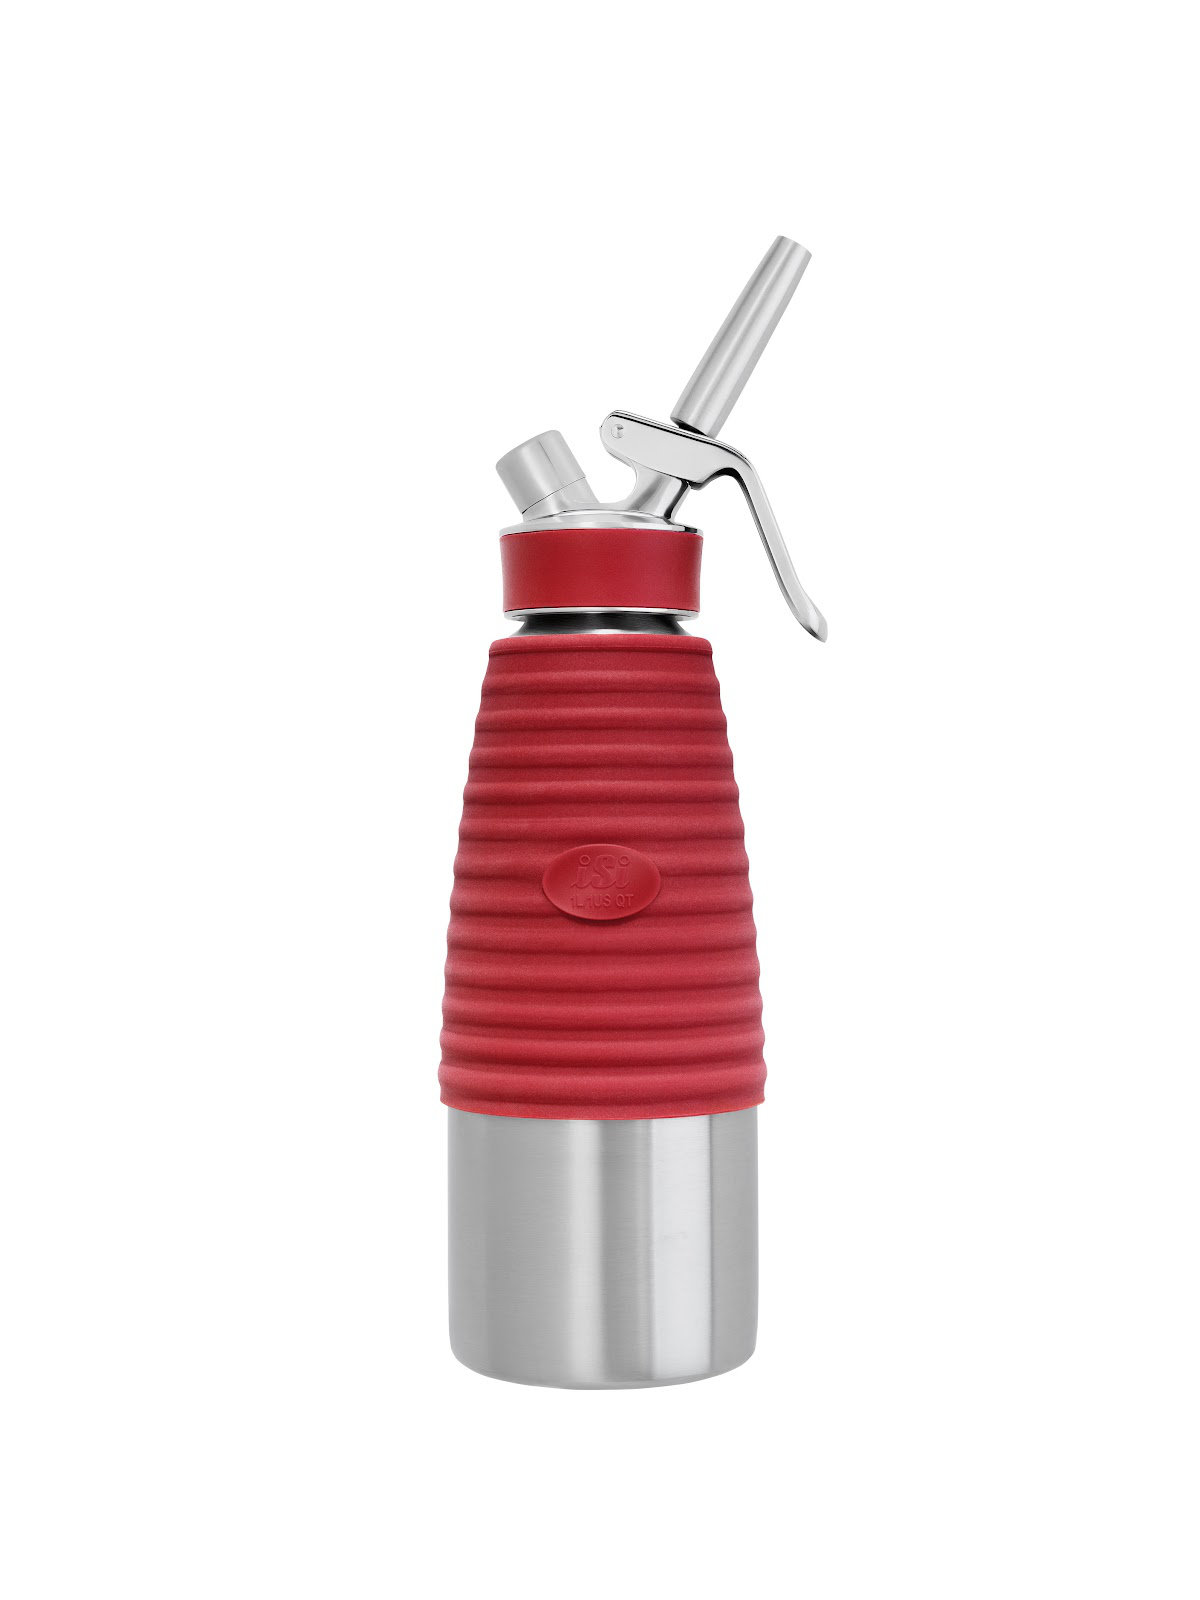 Isi North America Gourmet Whip Cream/Food Whipper For All Hot And